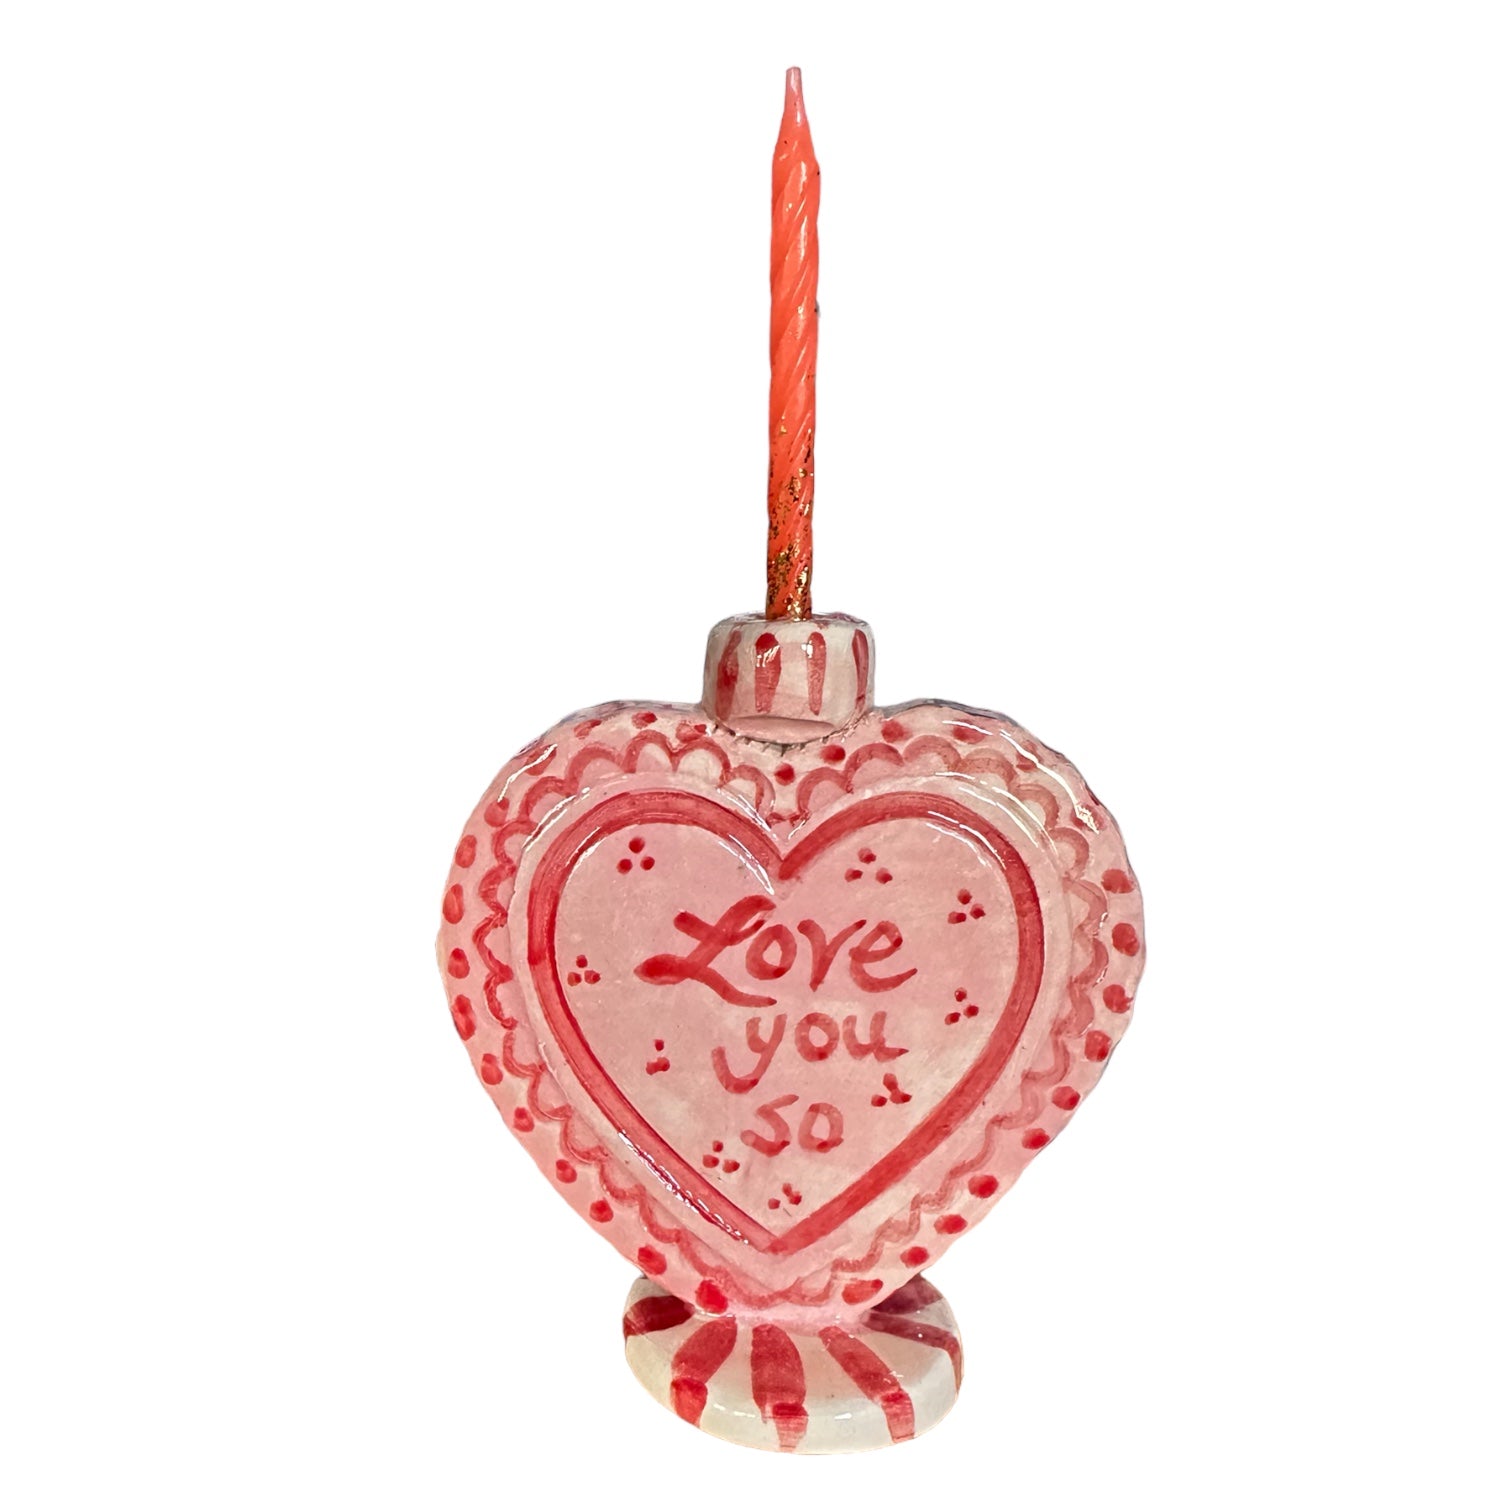 Small Candle Holder - Love You So - Premium Cake Topper from Tricia Lowenfield Design 